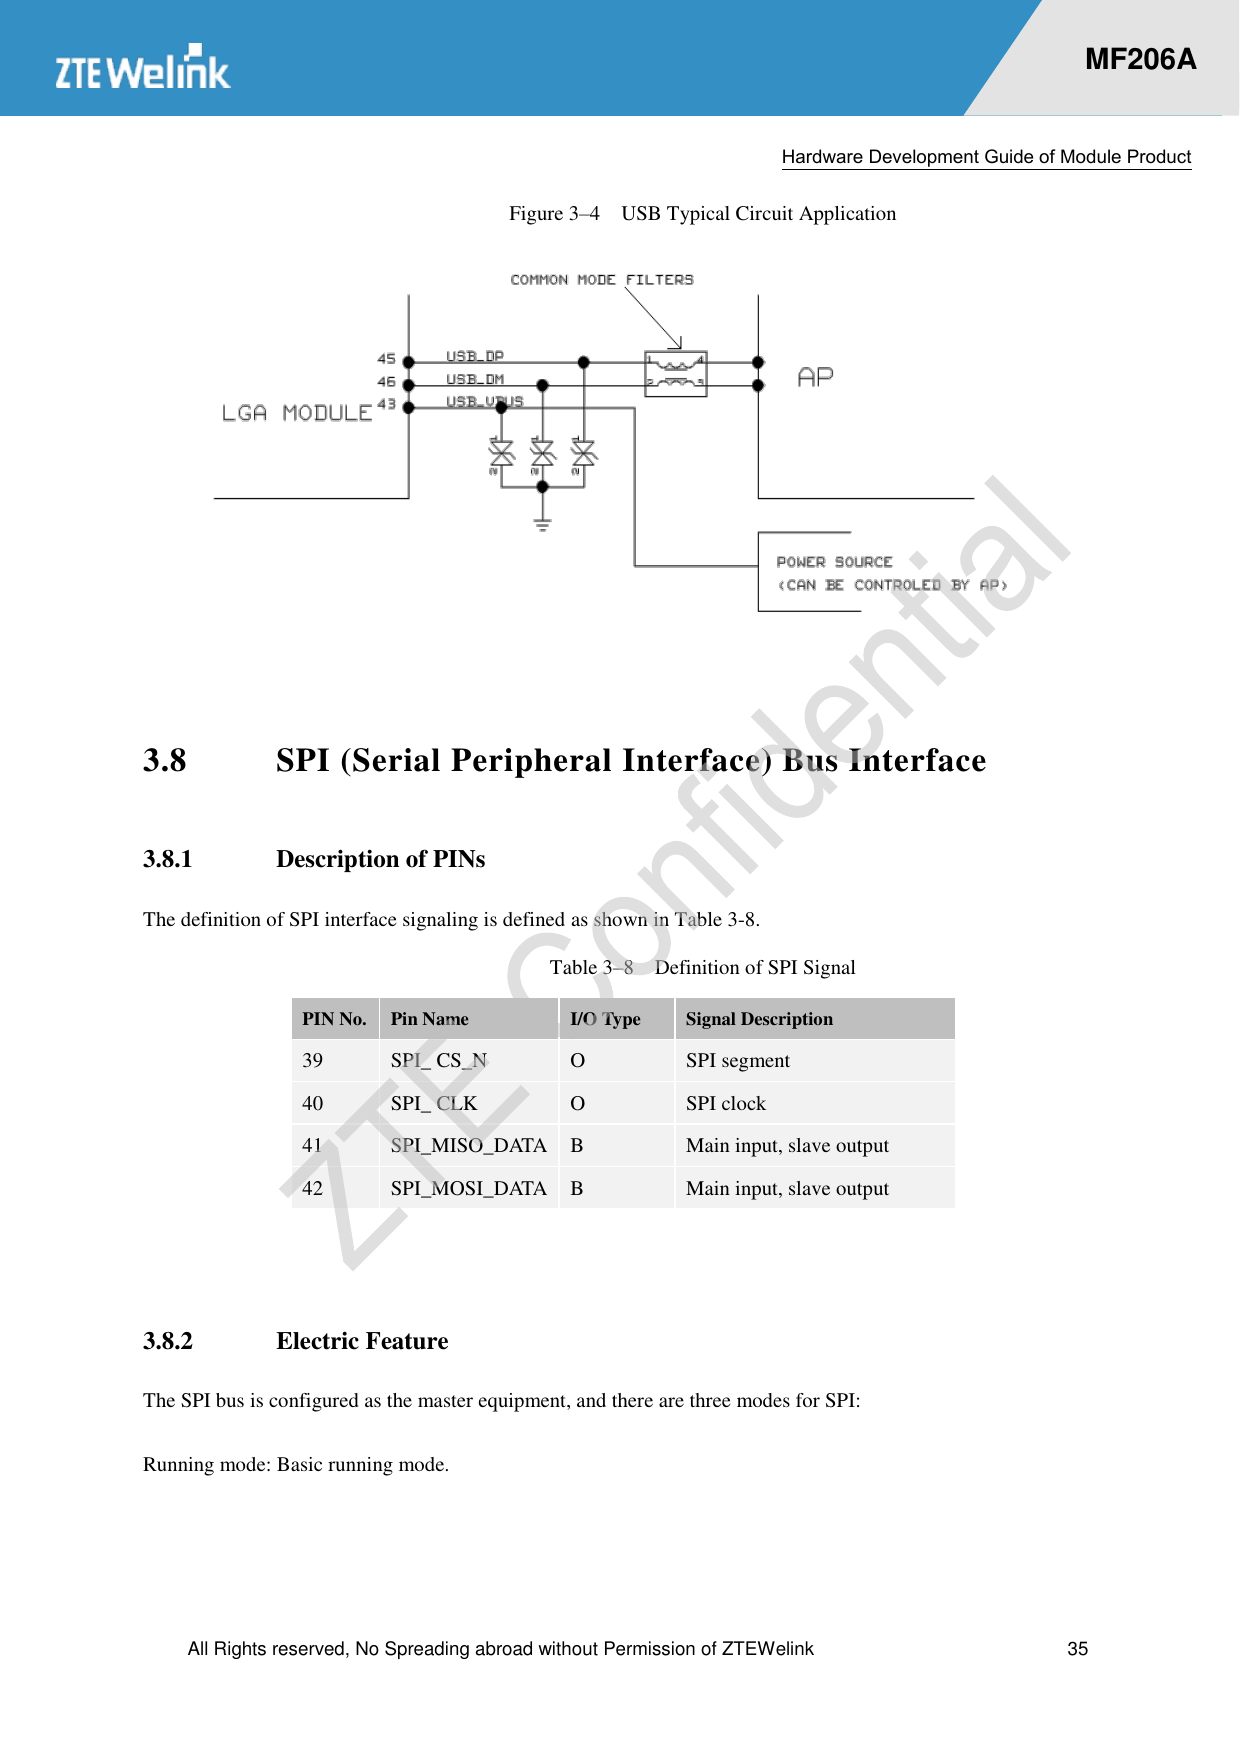  Hardware Development Guide of Module Product  All Rights reserved, No Spreading abroad without Permission of ZTEWelink  35    MF206A Figure 3–4  USB Typical Circuit Application   3.8 SPI (Serial Peripheral Interface) Bus Interface 3.8.1 Description of PINs The definition of SPI interface signaling is defined as shown in Table 3-8.   Table 3–8  Definition of SPI Signal PIN No. Pin Name I/O Type Signal Description 39 SPI_ CS_N O SPI segment 40 SPI_ CLK O SPI clock 41 SPI_MISO_DATA B Main input, slave output 42 SPI_MOSI_DATA B Main input, slave output  3.8.2 Electric Feature The SPI bus is configured as the master equipment, and there are three modes for SPI:   Running mode: Basic running mode.   